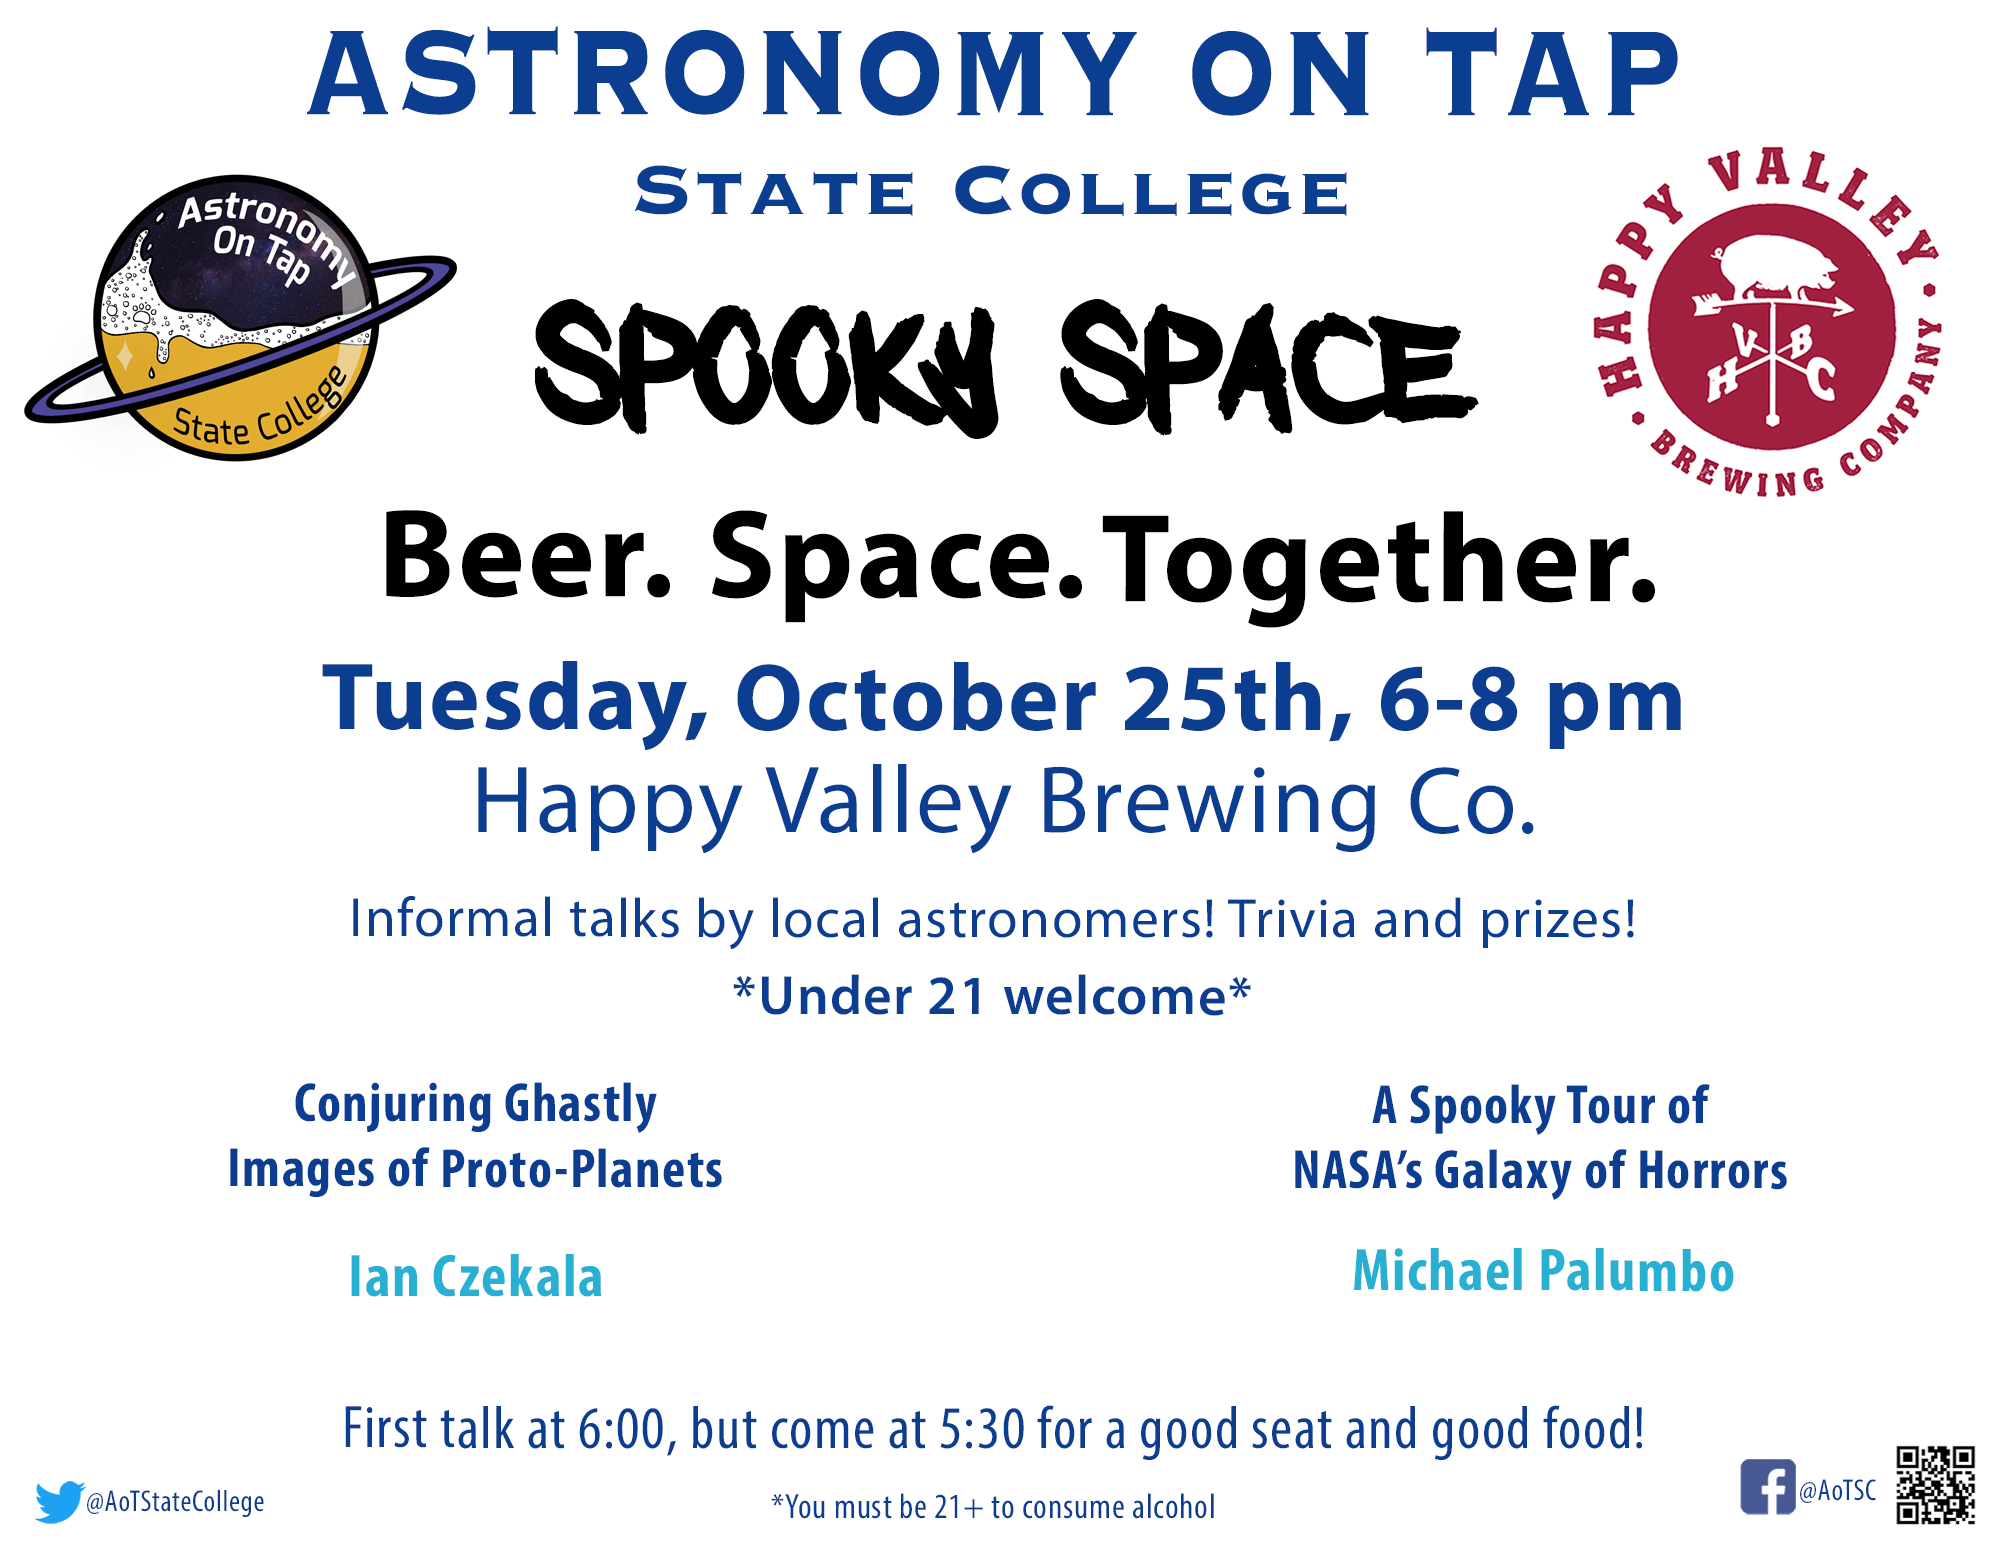 Astronomy on Tap State College on October 25 from 6-8 pm at Happy Valley Brewing Company. The event is spooky themed.